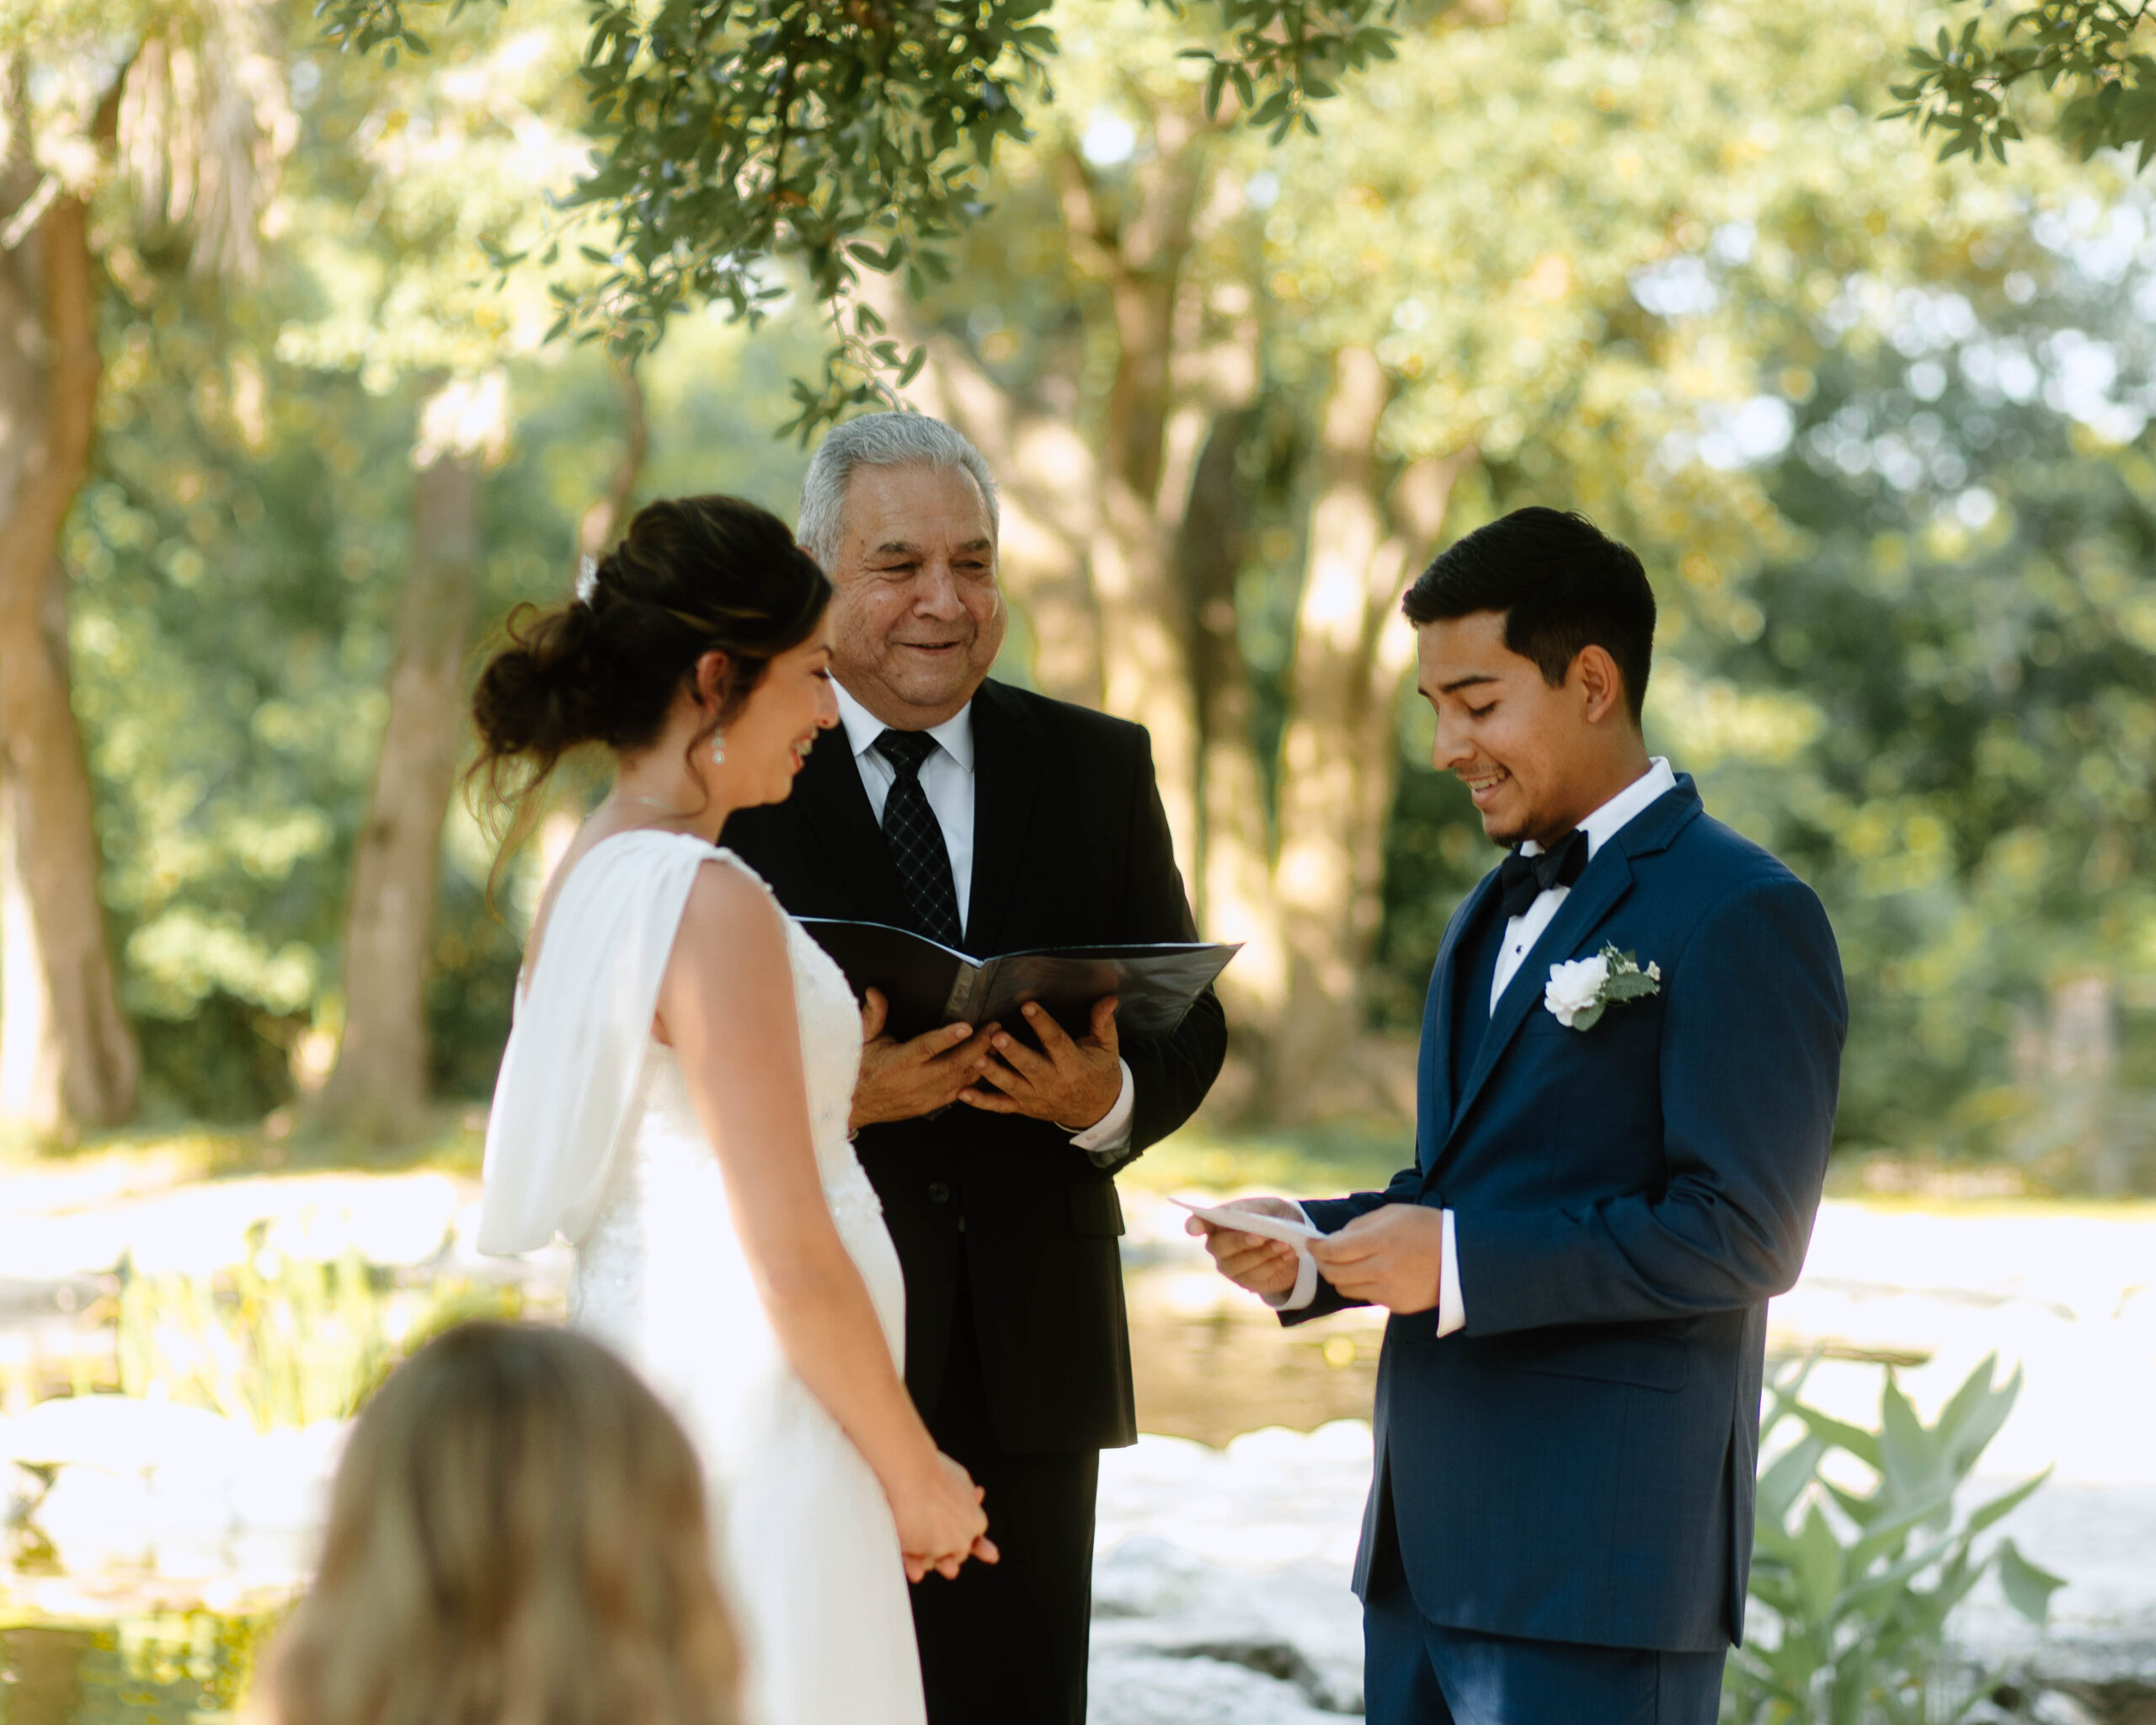 Ceremony Wedding Photography at Mayfield Gardens. Photograph by Bare Moments Photography. Taken during the summer in Austin, Texas. 